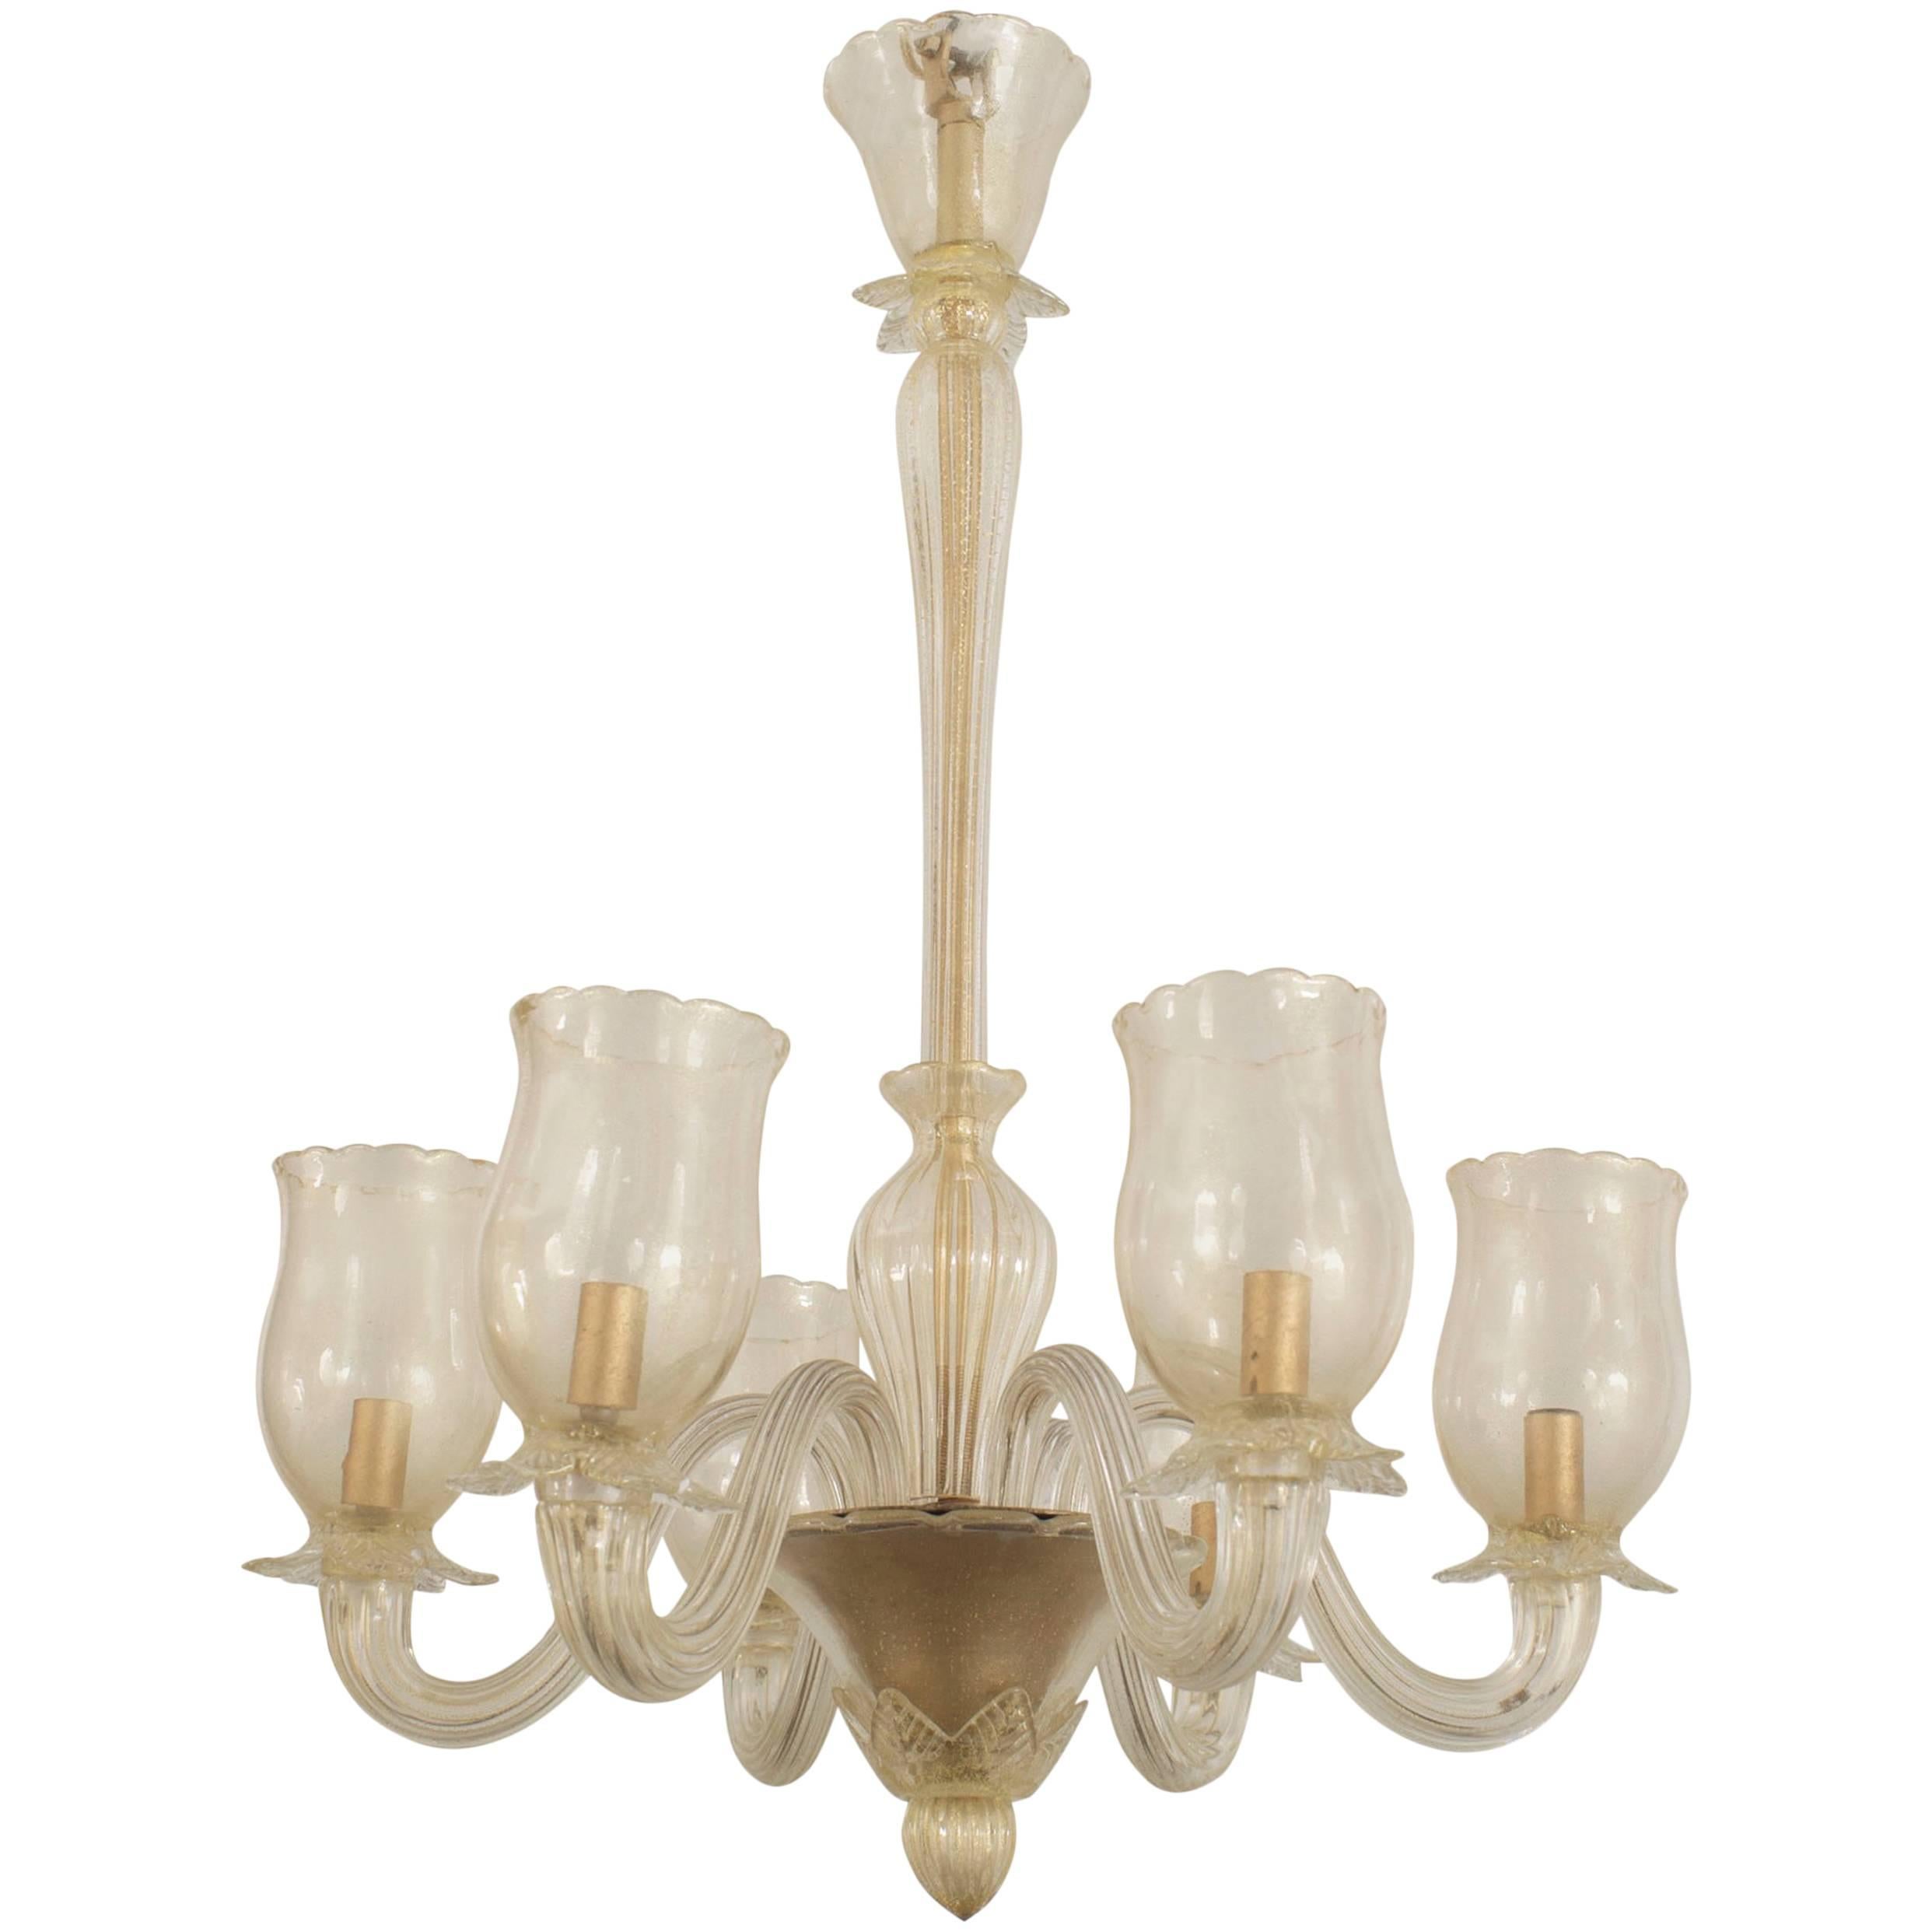 Barovier et Toso Italian Murano Gold Dusted Glass Chandelier For Sale